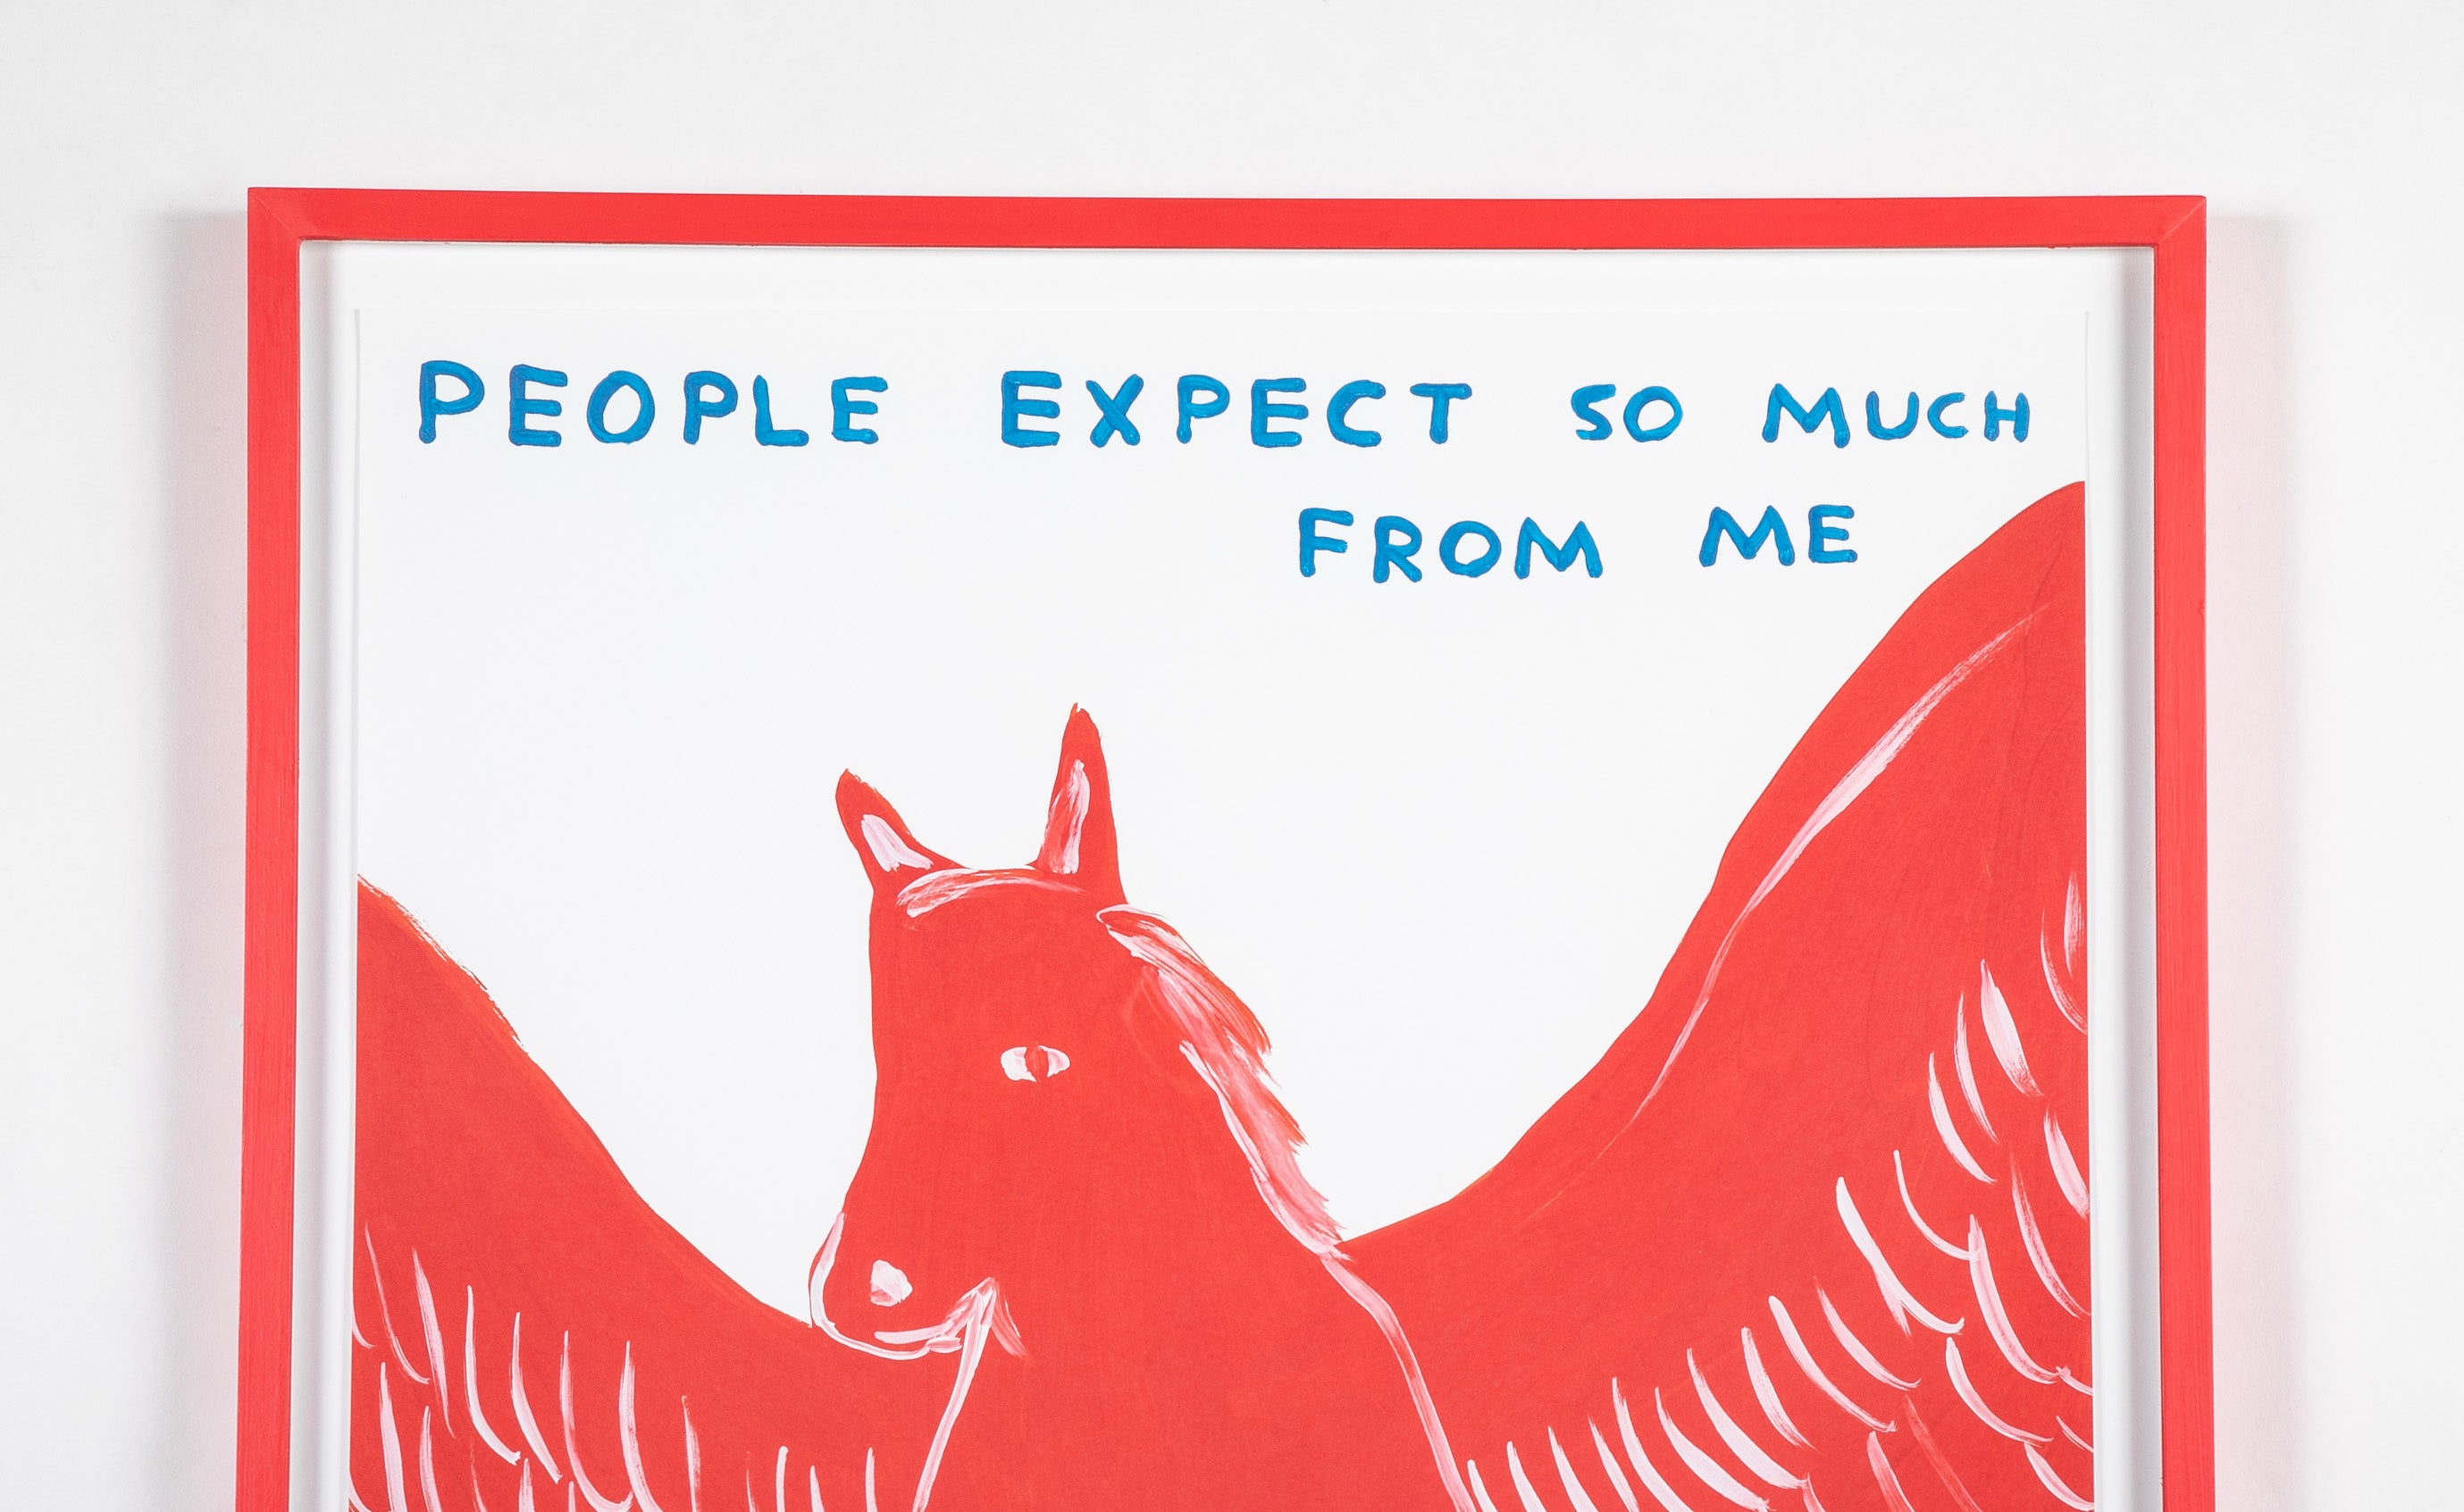 David Shrigley (b.1968) Print of Red Pegasus "People Expect so Much from Me"